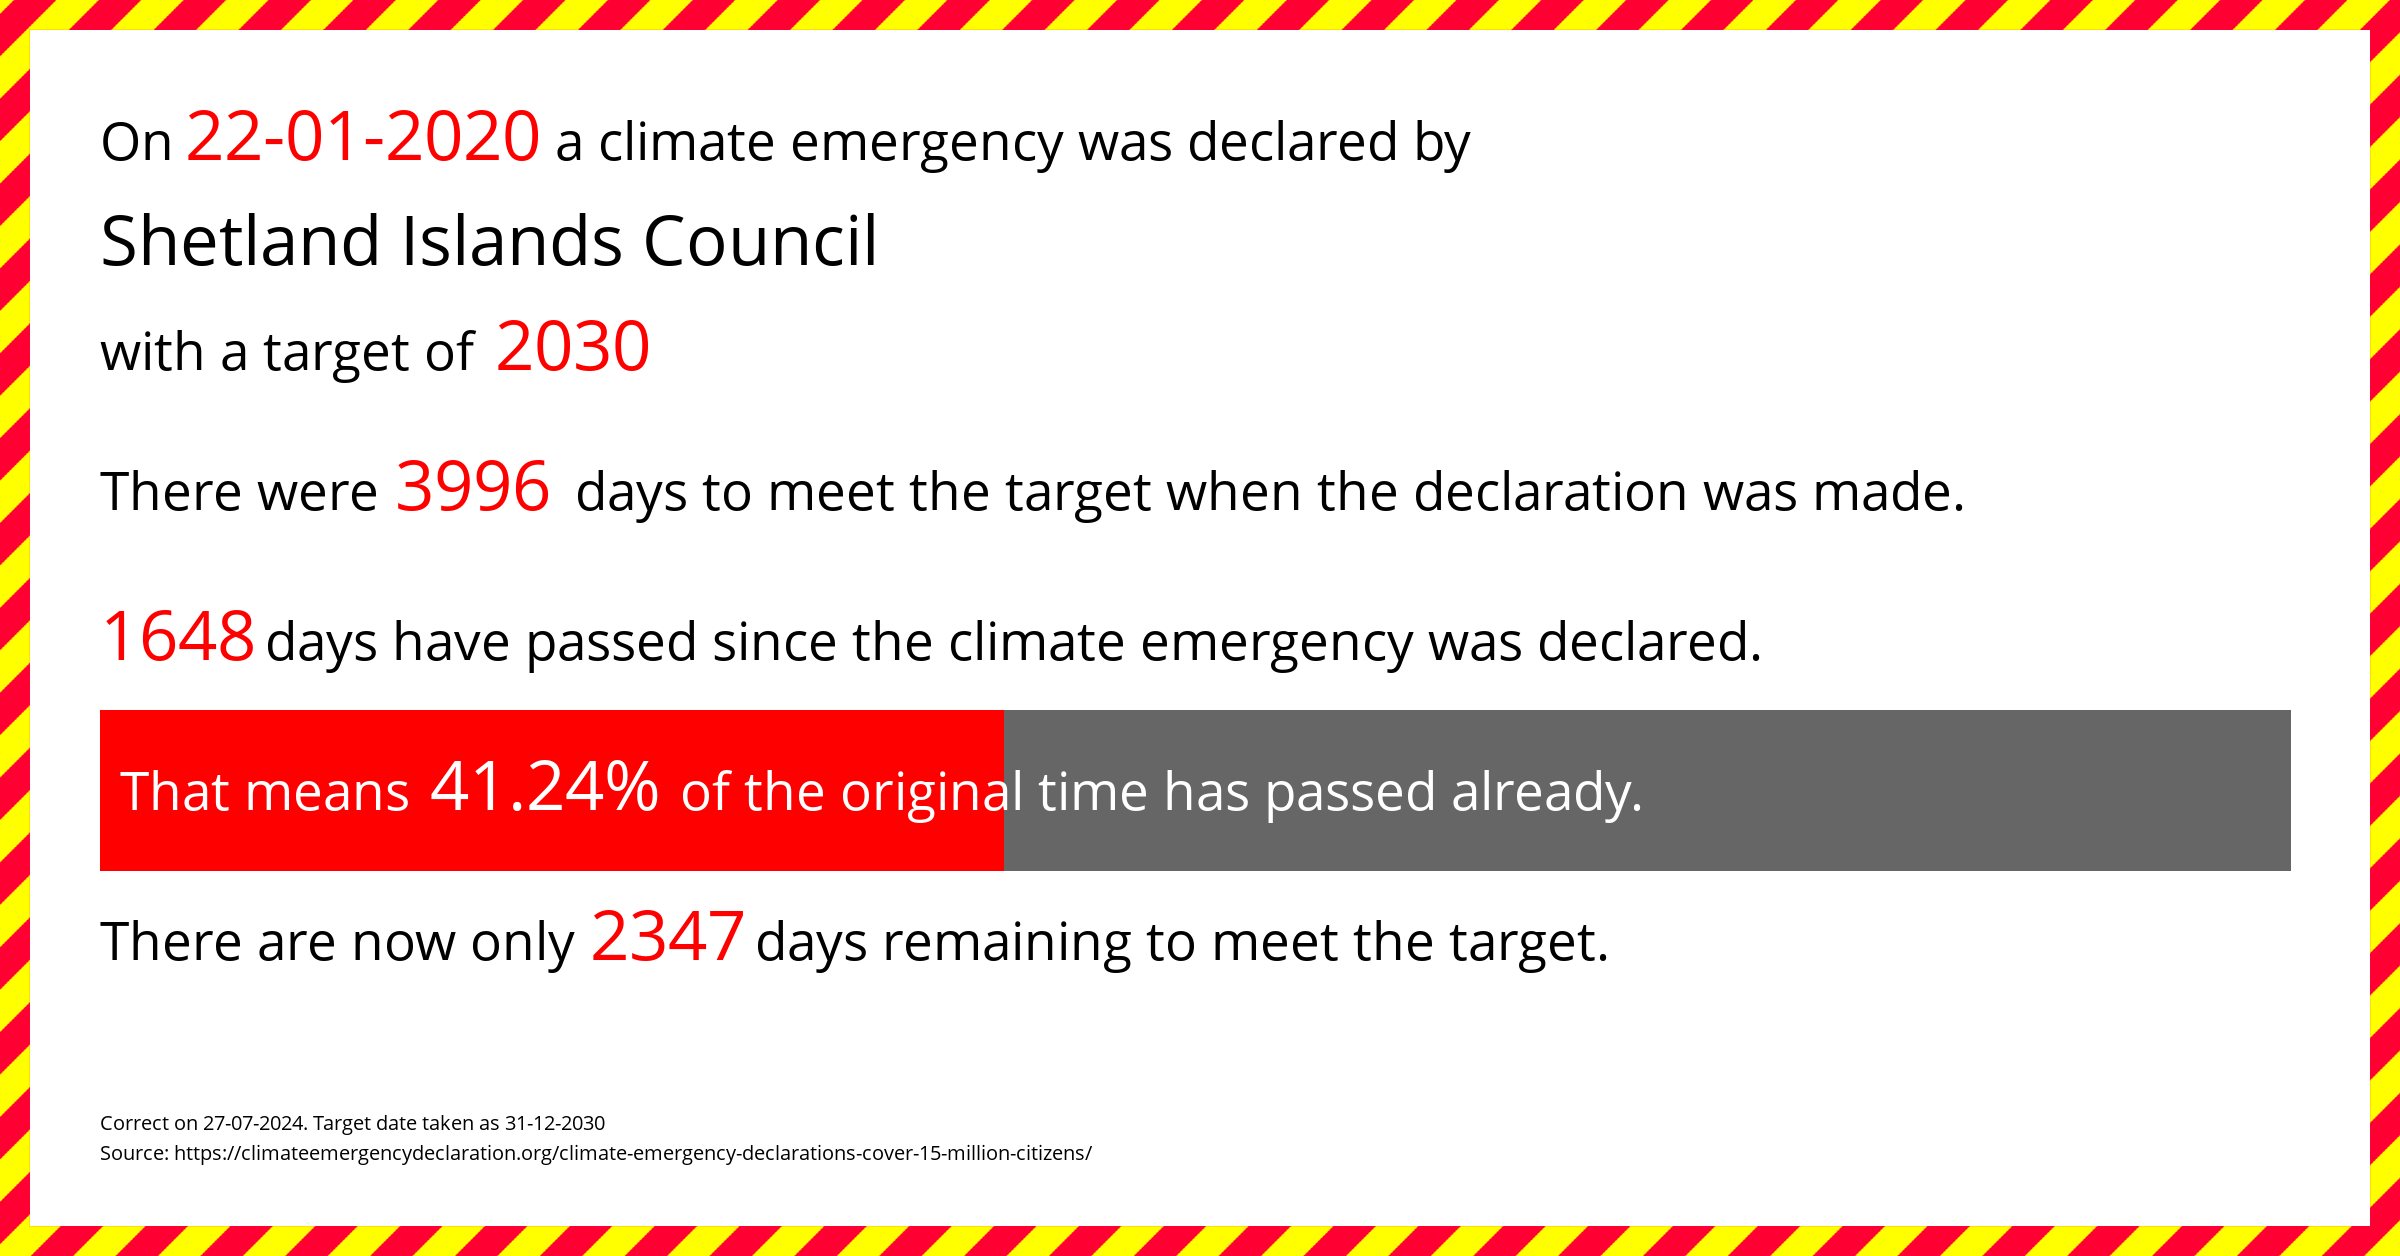 Shetland Islands Council declared a Climate emergency on Wednesday 22nd January 2020, with a target of 2030.